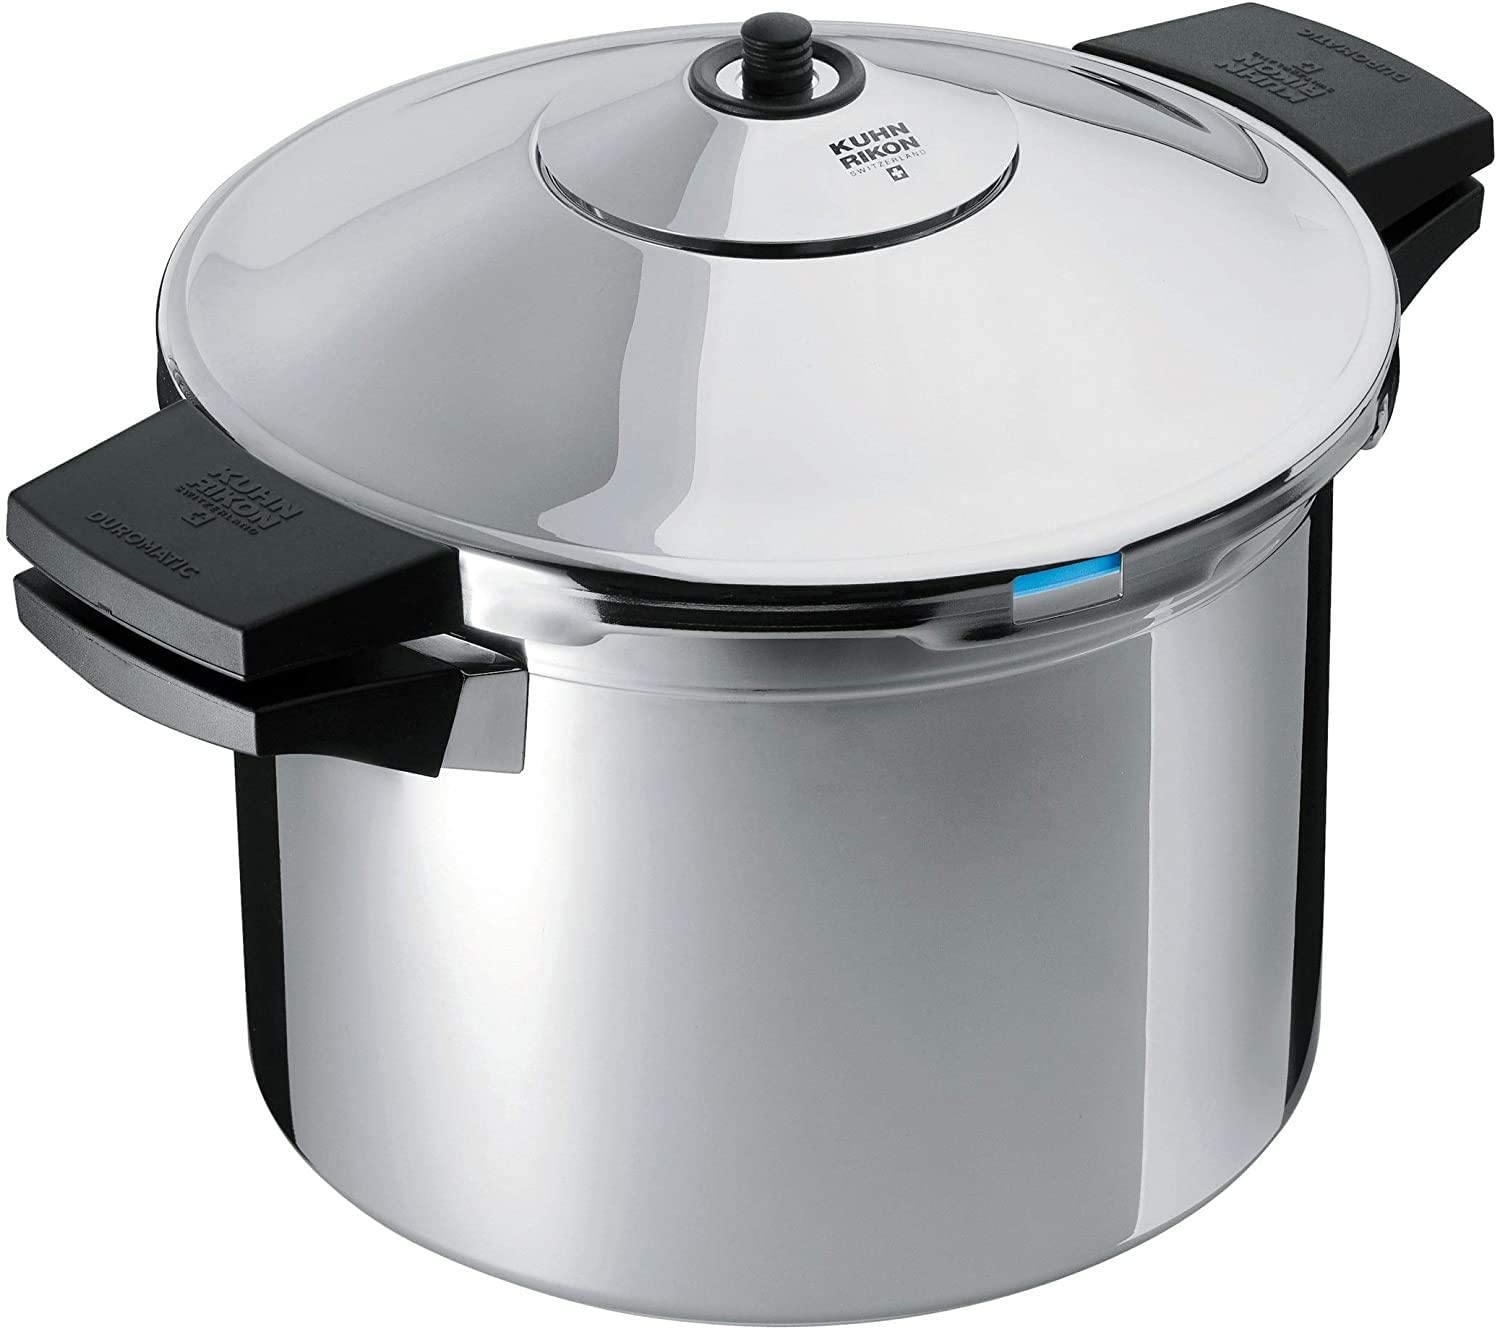 Kuhn Rikon Duromatic Inox Pressure Cooker With Side Grips (22cm), 6.0 Litre